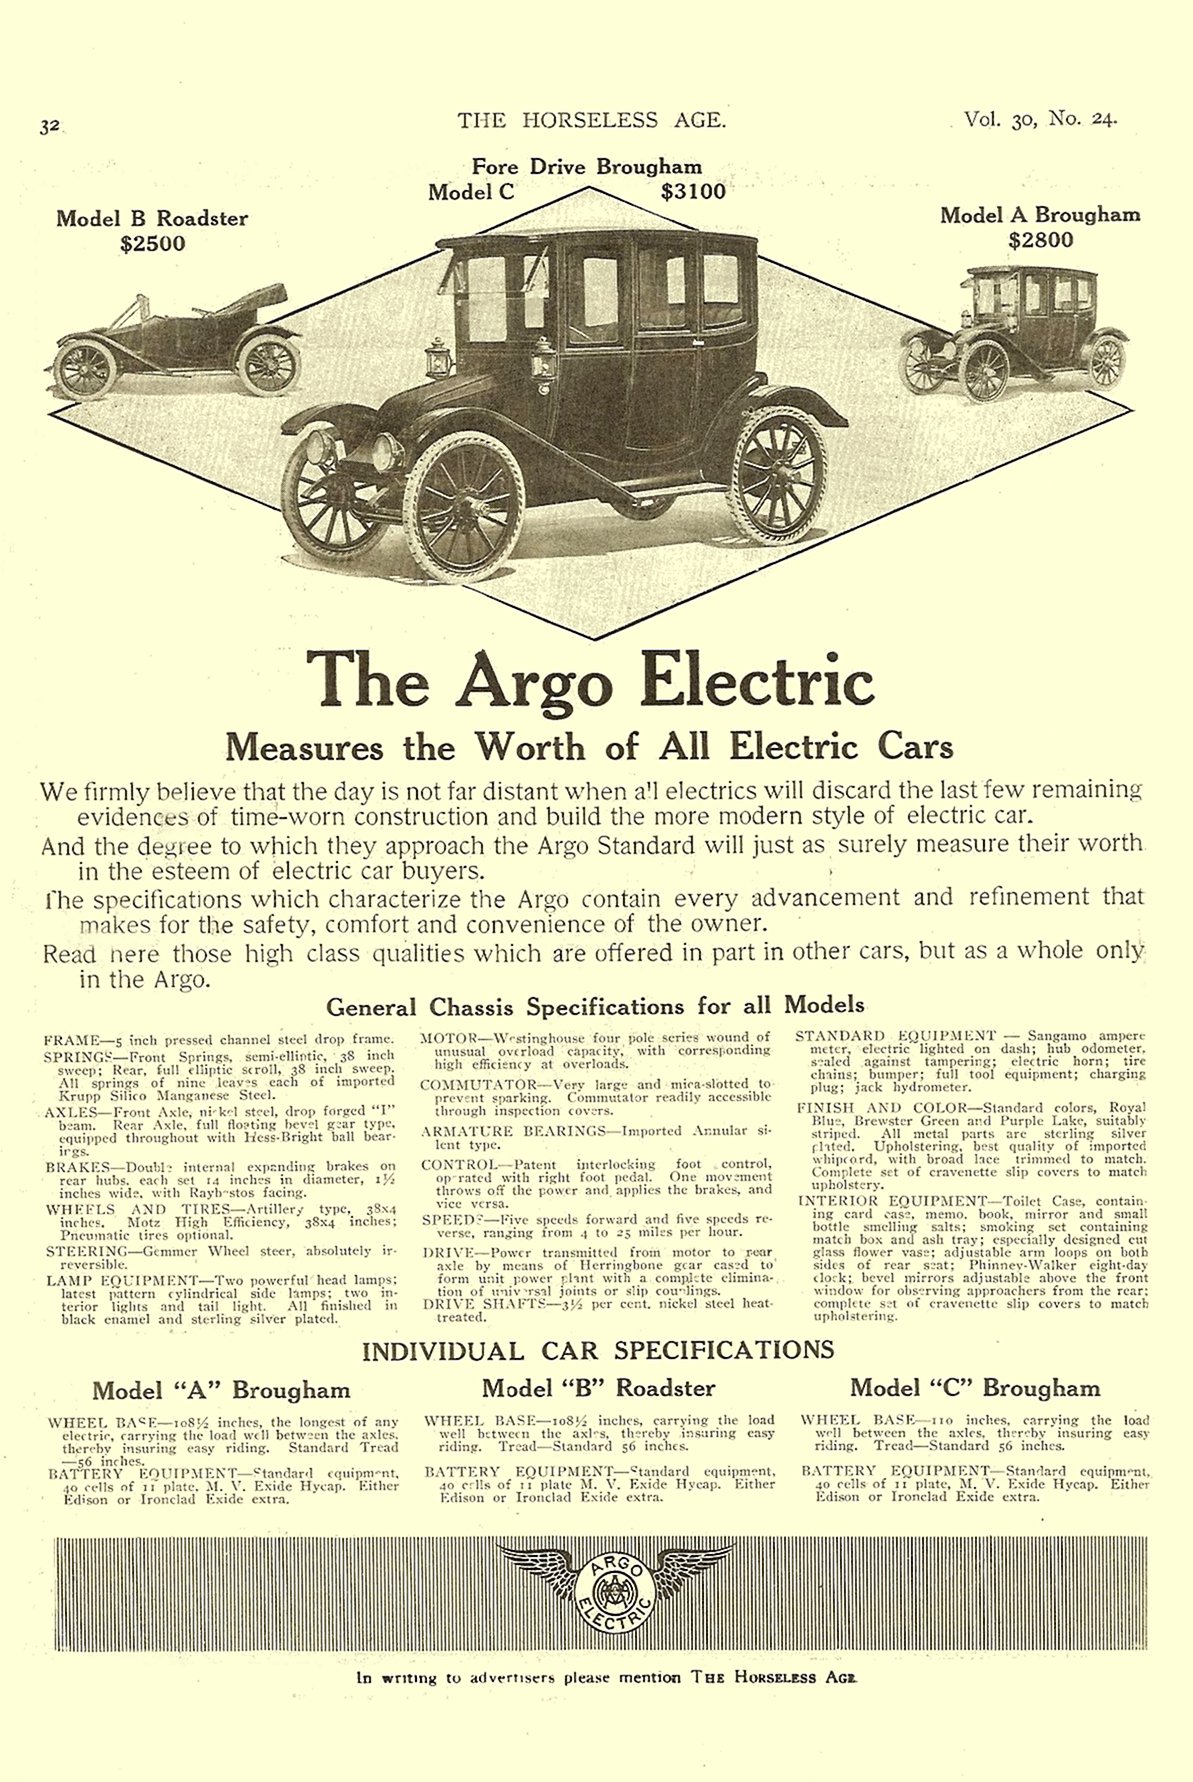 1912 12 11The Argo Electric Model A Brougham, Model B Roadster, Model C Fore Drive Brougham The Horseless Age magazine December 11, 1912 Vol.30 No. 24 9″x12″ page 32